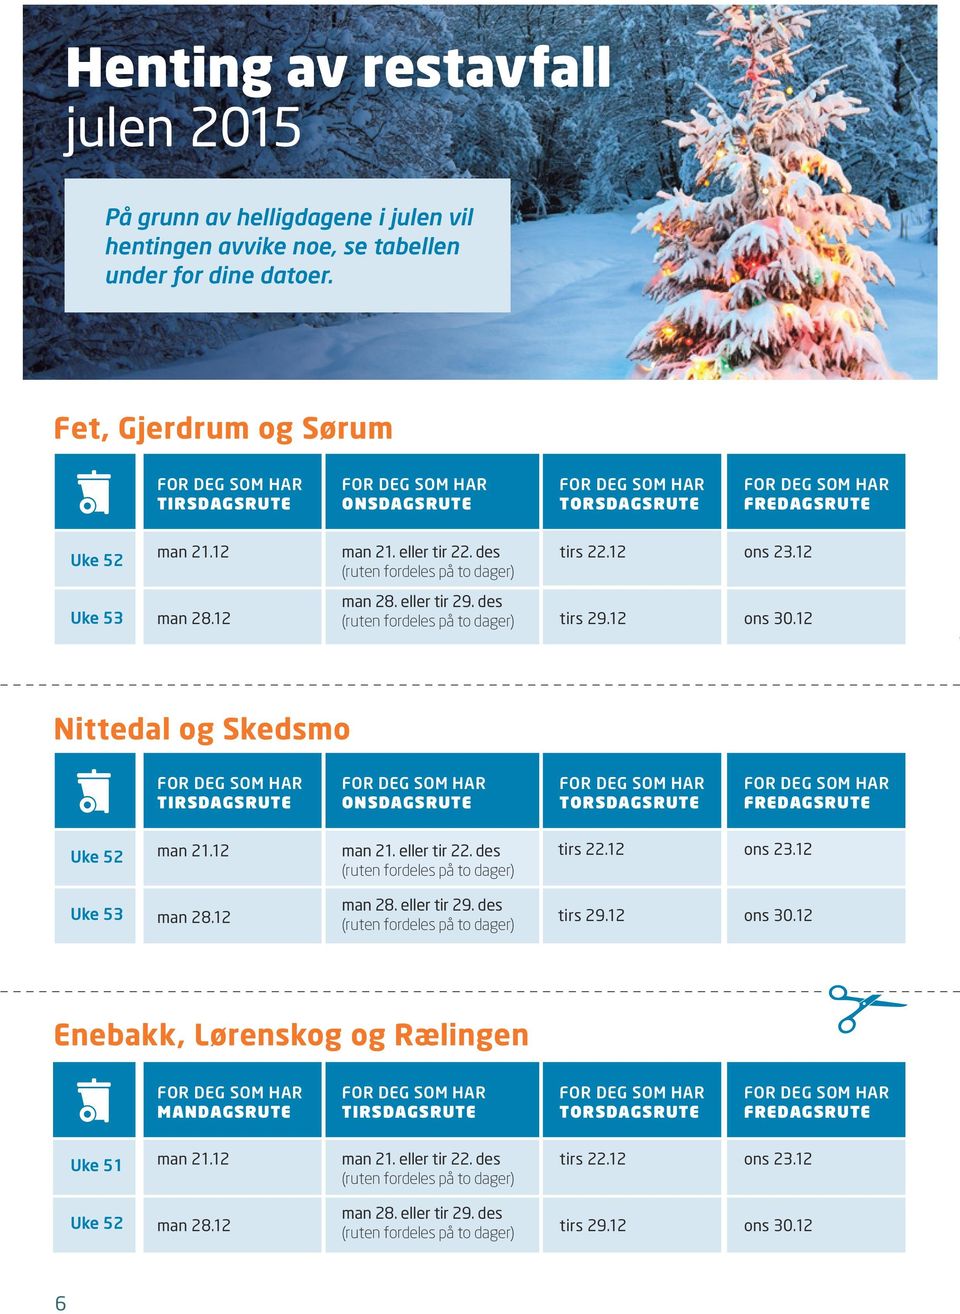 des (ruten fordeles på to dager) tirs 29.12 30.12 Nittedal og Skedsmo TIRSDAGSRUTE ONSDAGSRUTE TORSDAGSRUTE FREDAGSRUTE Uke 52 21.12 21. eller tir 22. des (ruten fordeles på to dager) tirs 22.12 23.